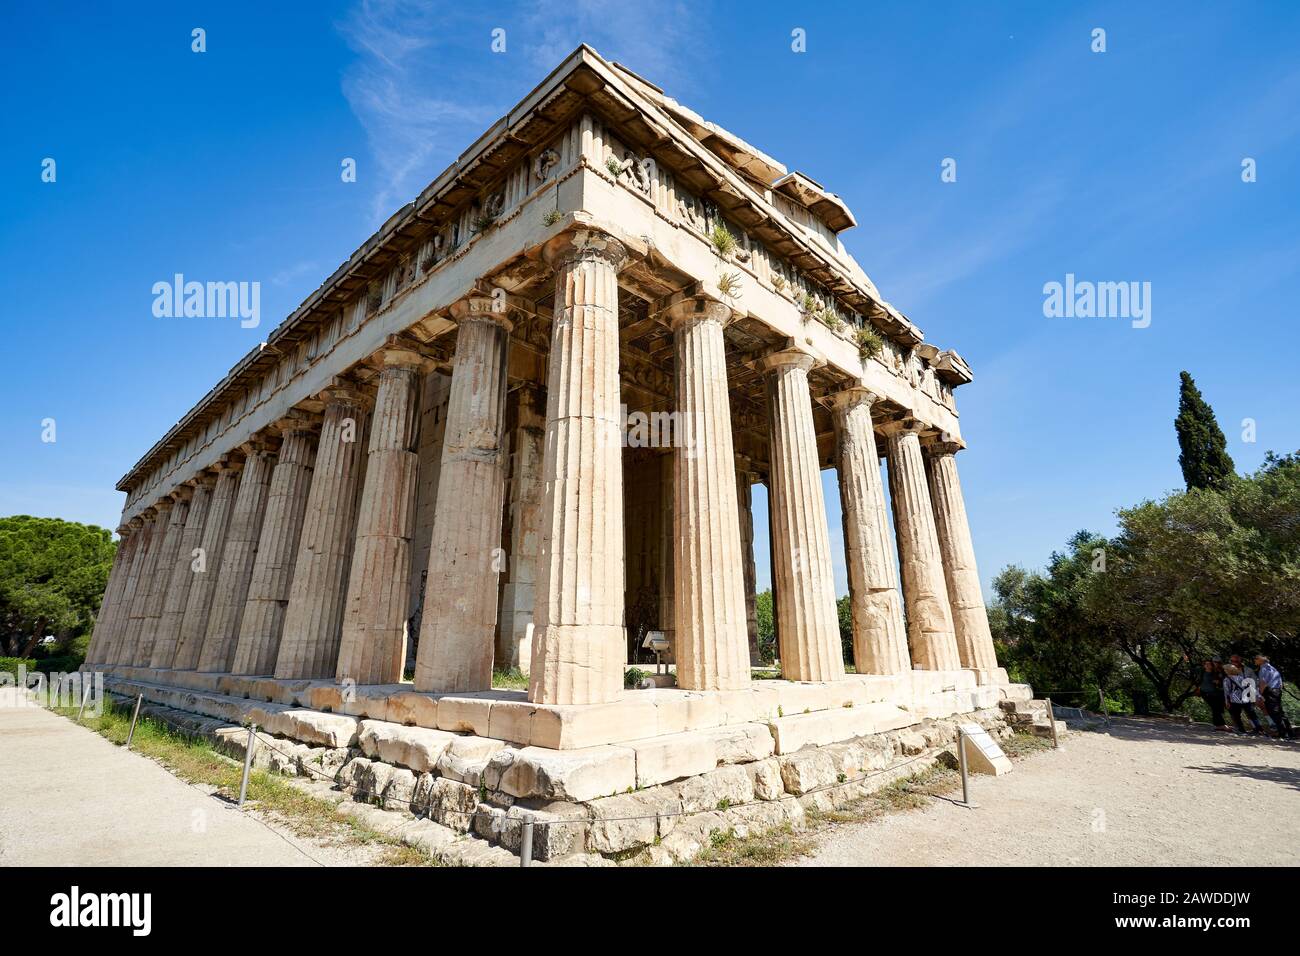 ATHENS, GREECE - 2019 May 18: old ancient ruins Roman Agora in a summer day in Acropolis Greece, Athens Stock Photo